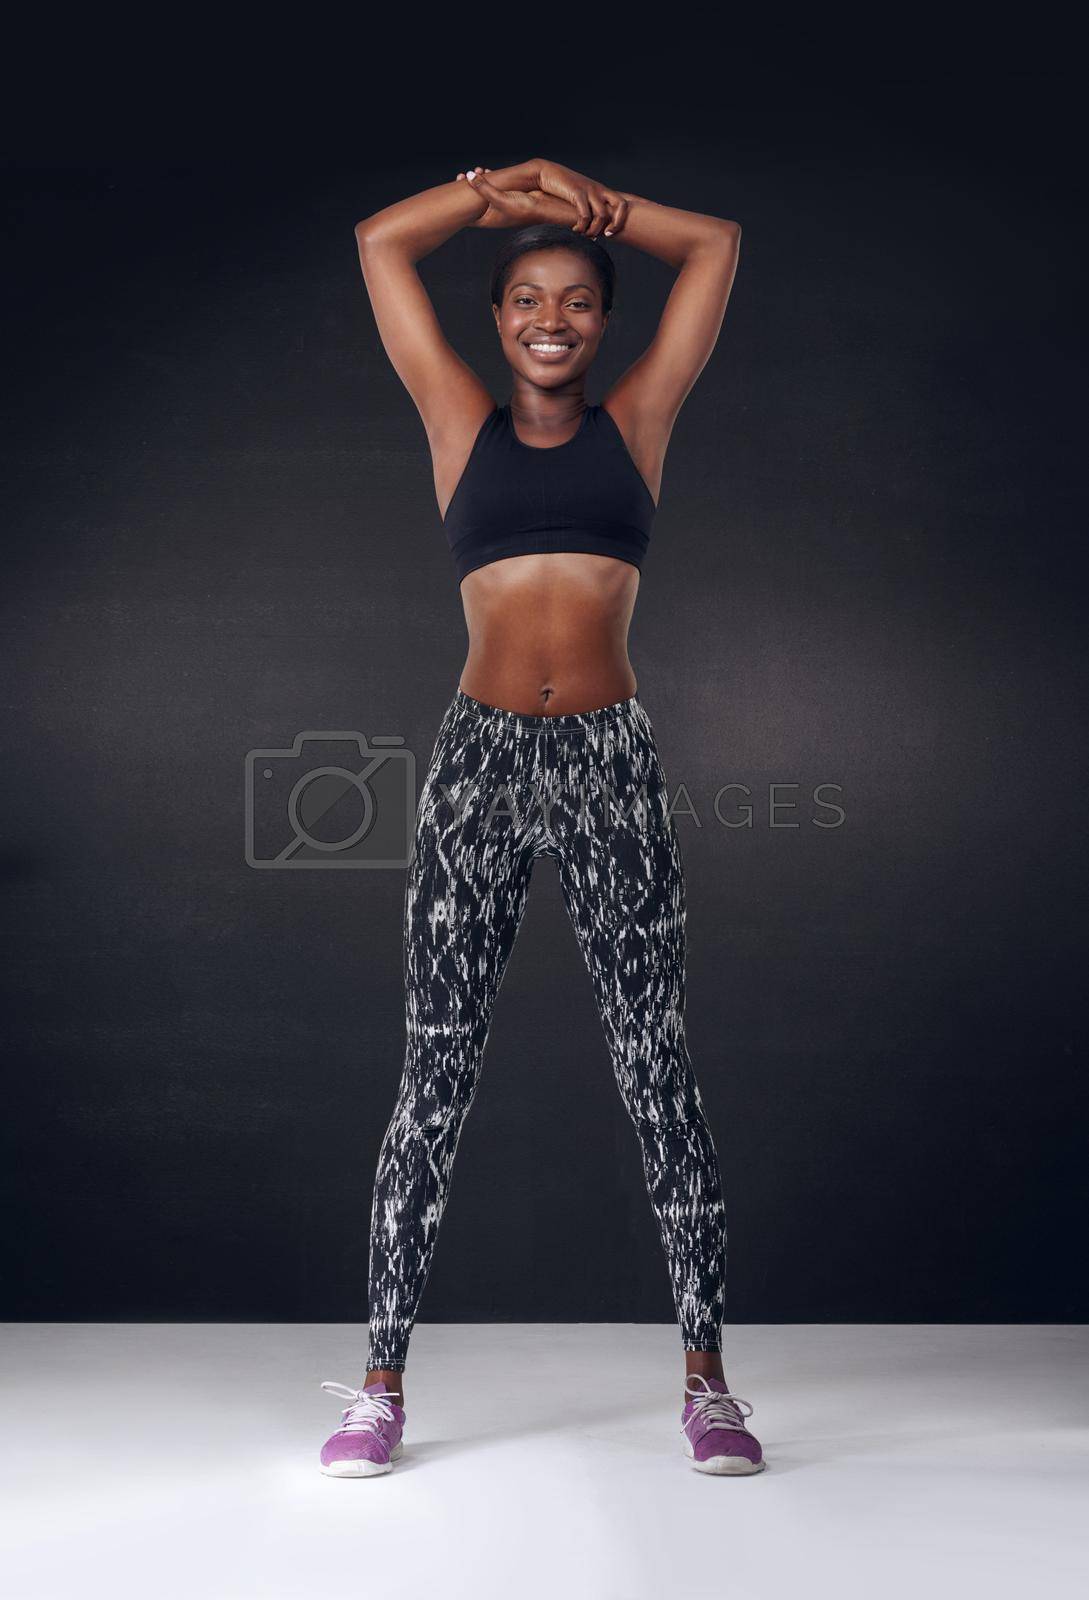 Royalty free image of Proud of the body Ive achieved. Studio shot of a beautiful young woman stretching against a black background. by YuriArcurs